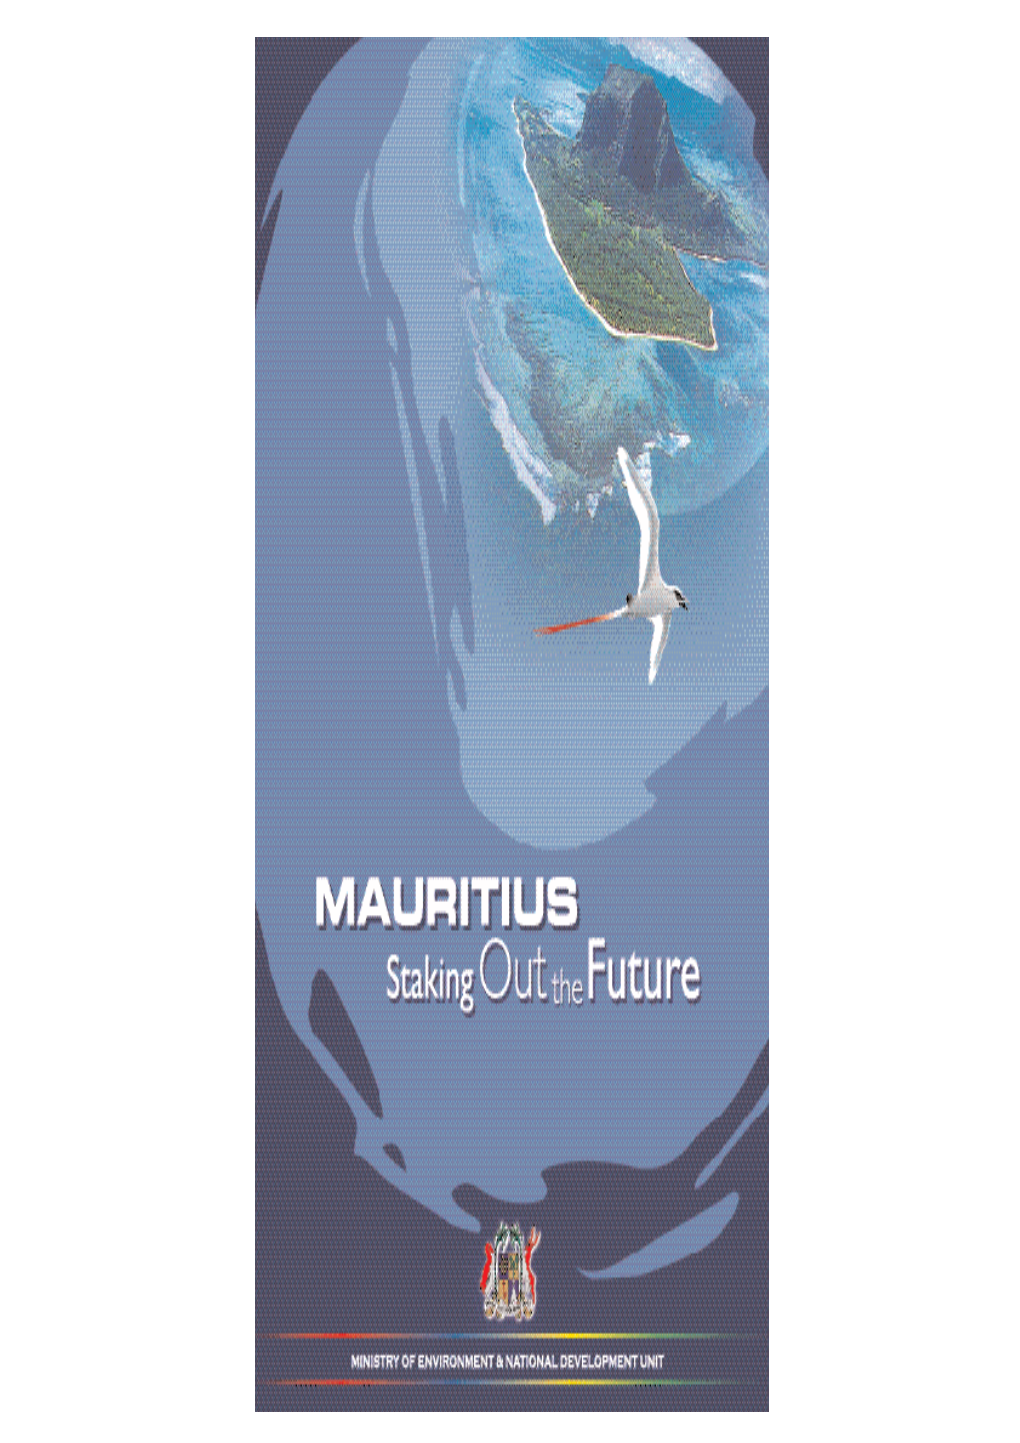 NSDS Experience of Mauritius